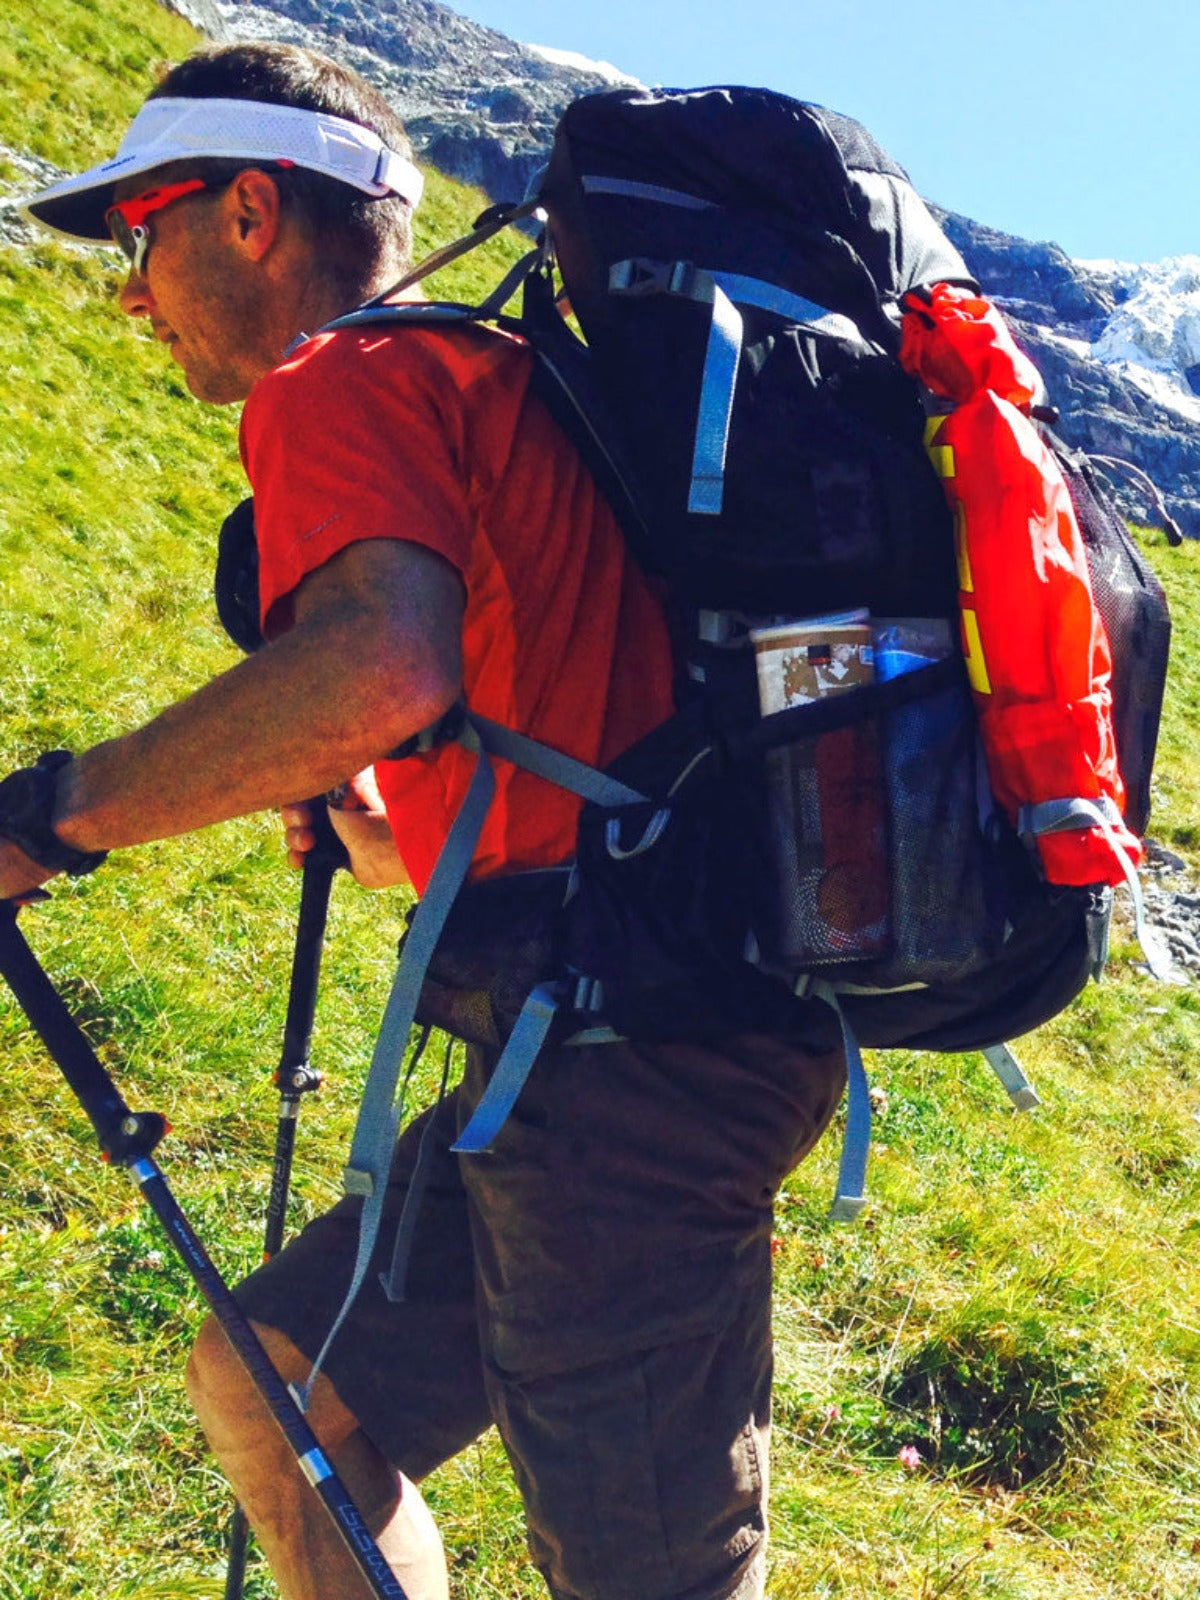 Profile of a hiker wearing an OutThere backpack, showing the ergonomic shoulder straps